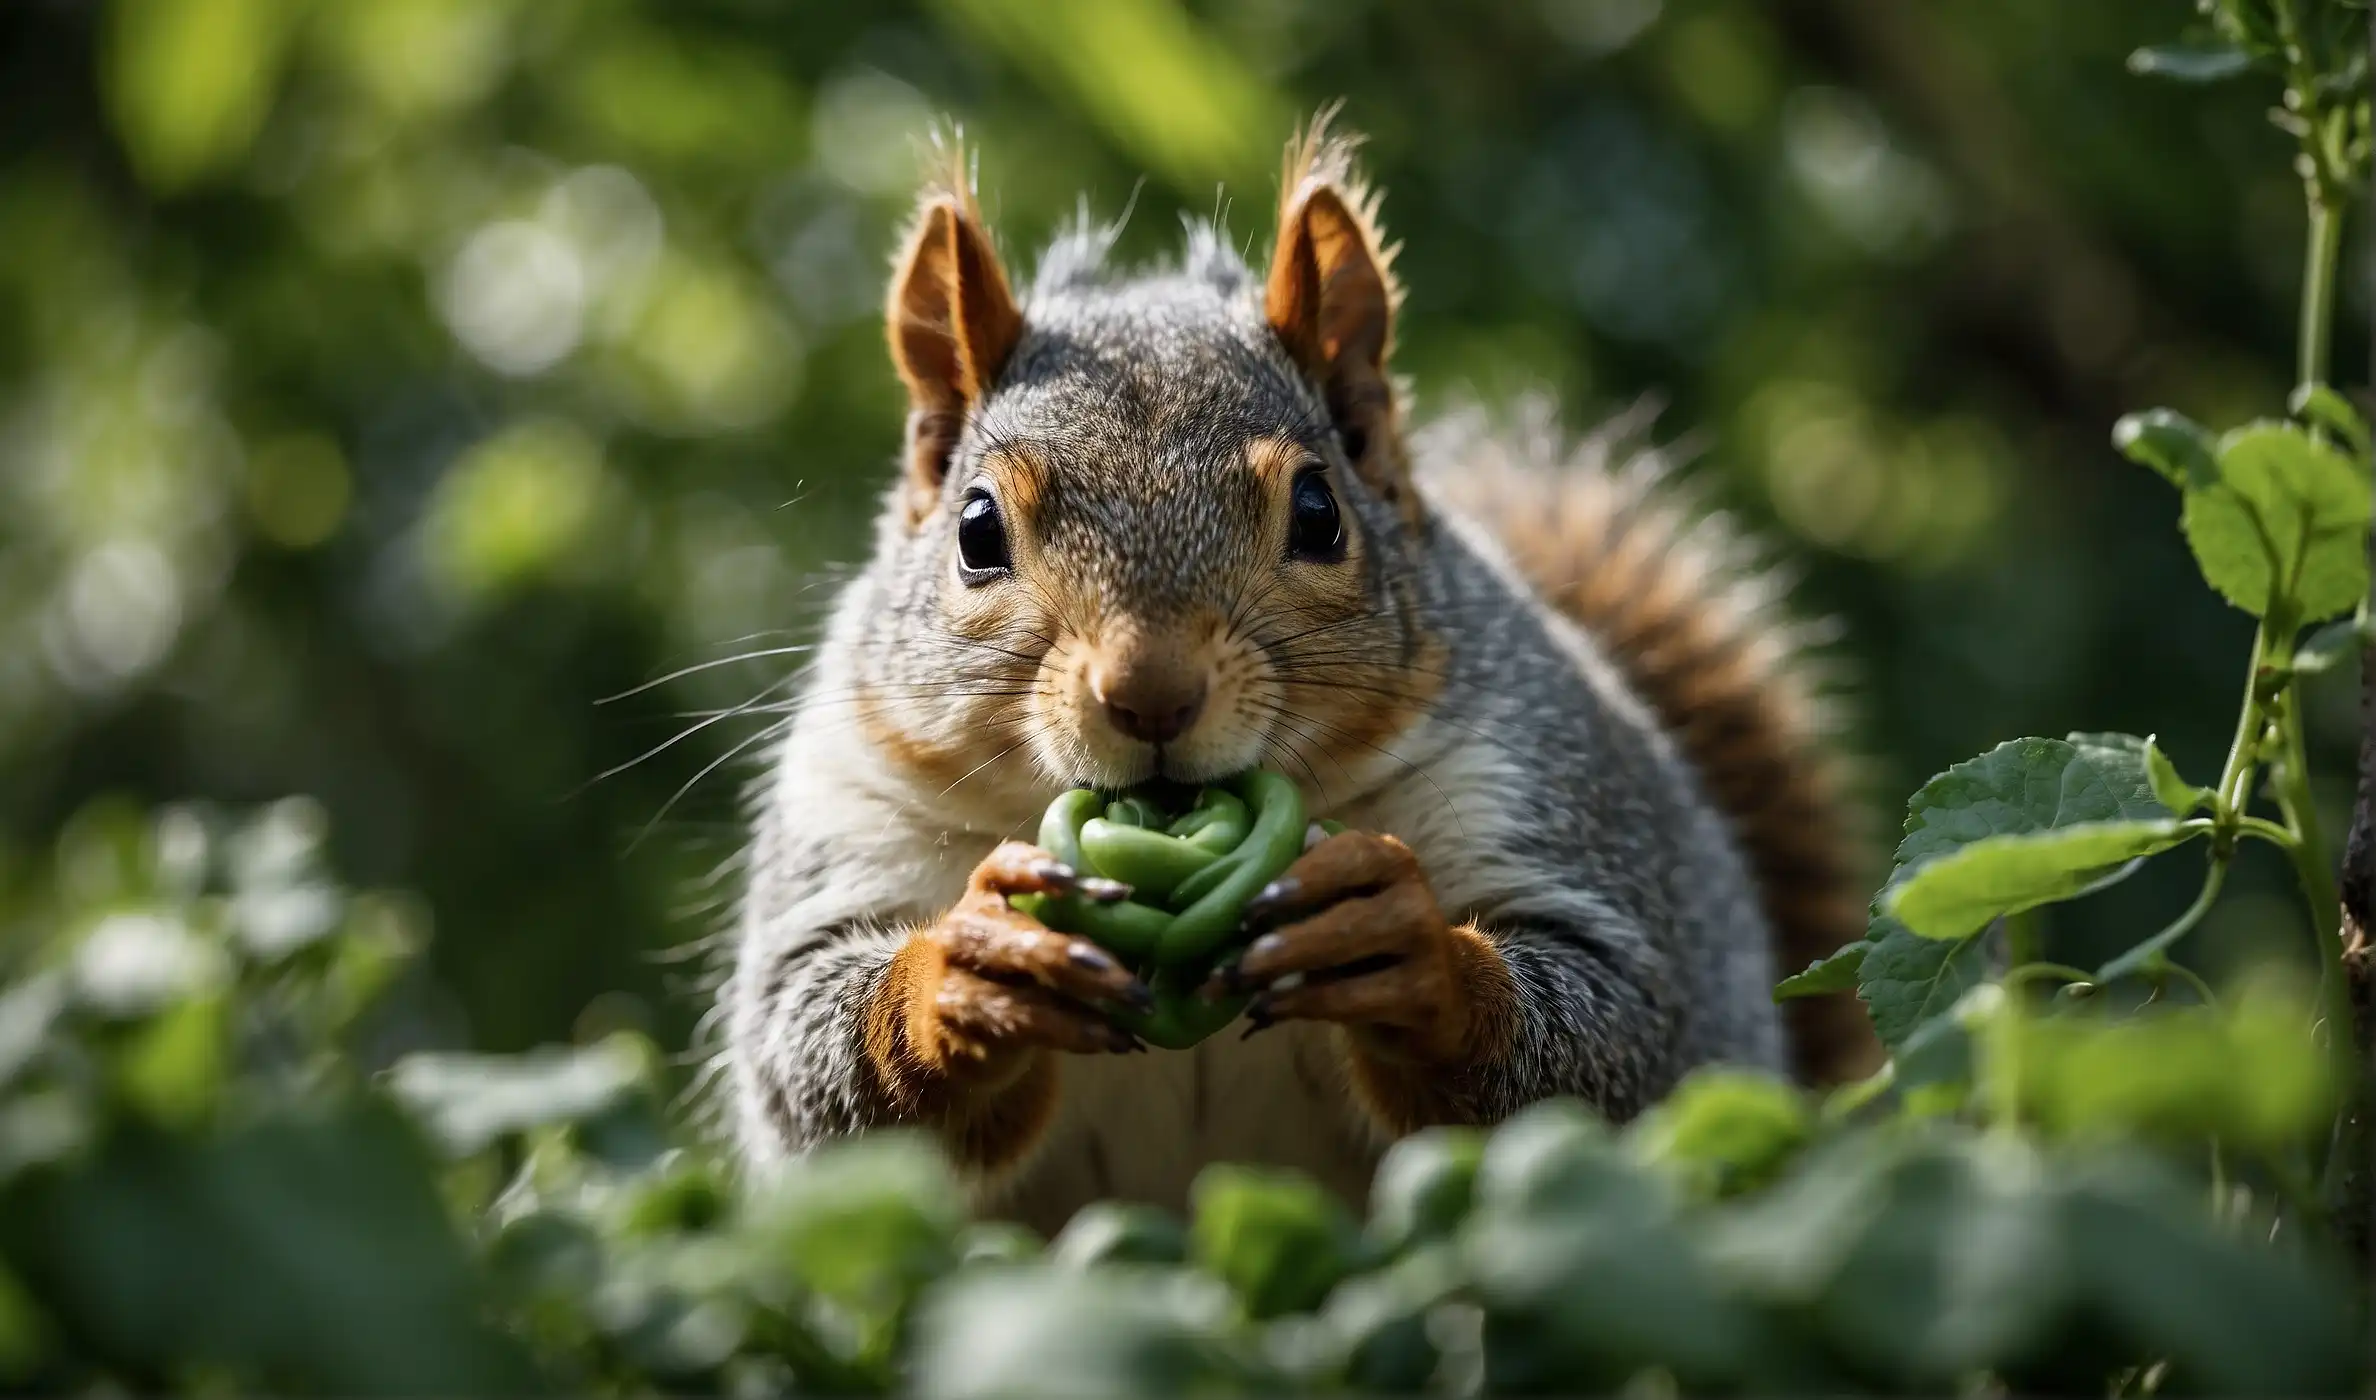 Can Squirrels Eat Green Beans? Nutritional Facts Revealed